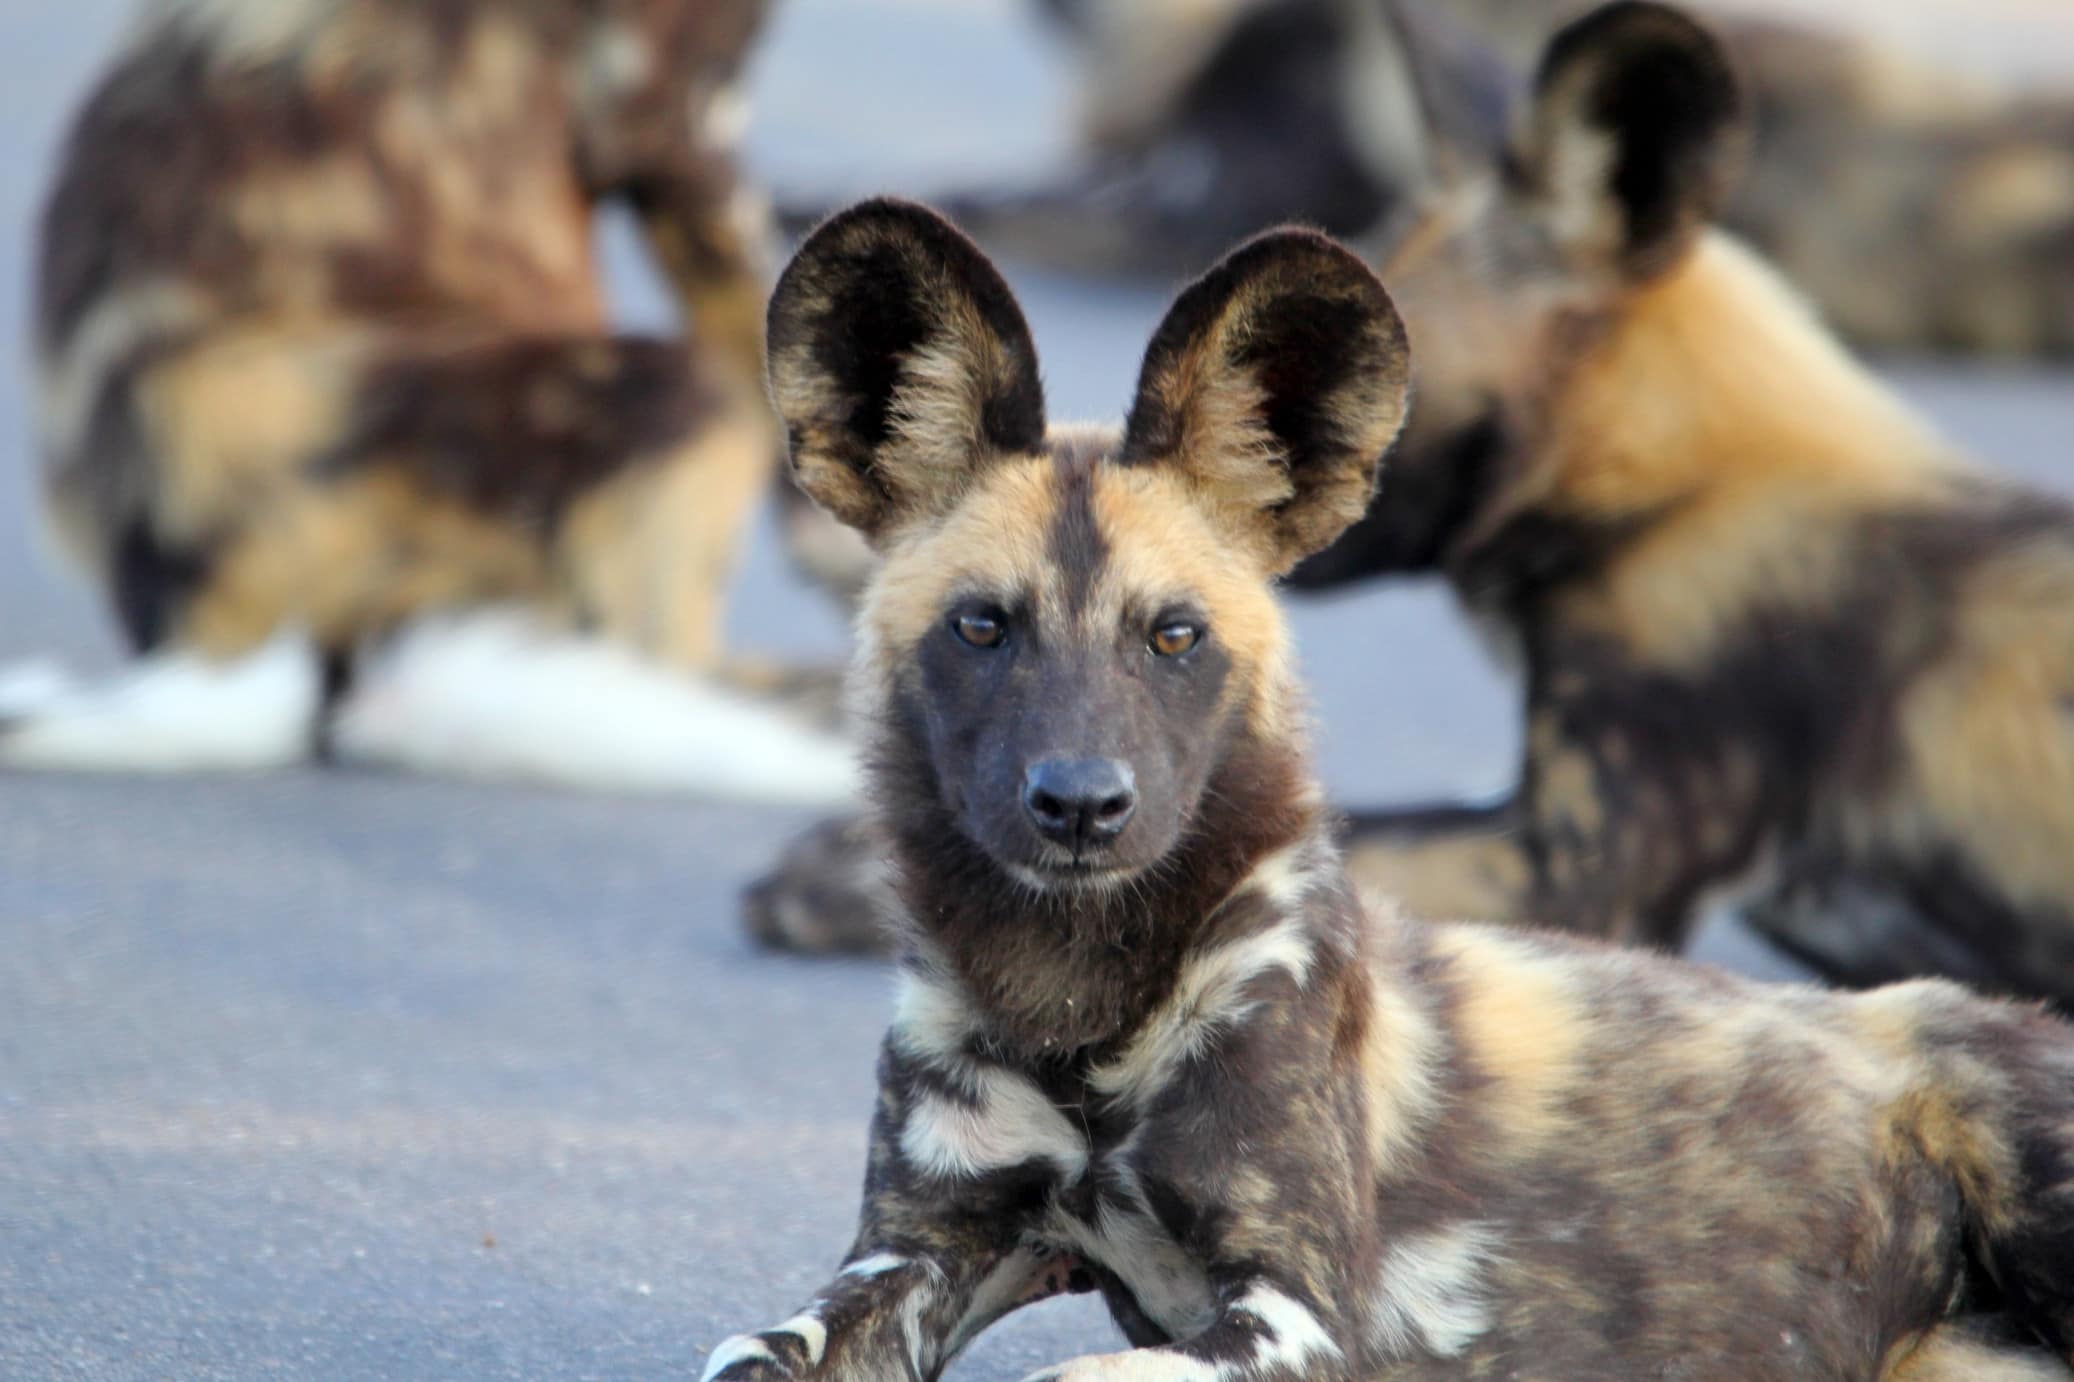 Fascinating African Wild Dog Facts And Where To See Them - Southern